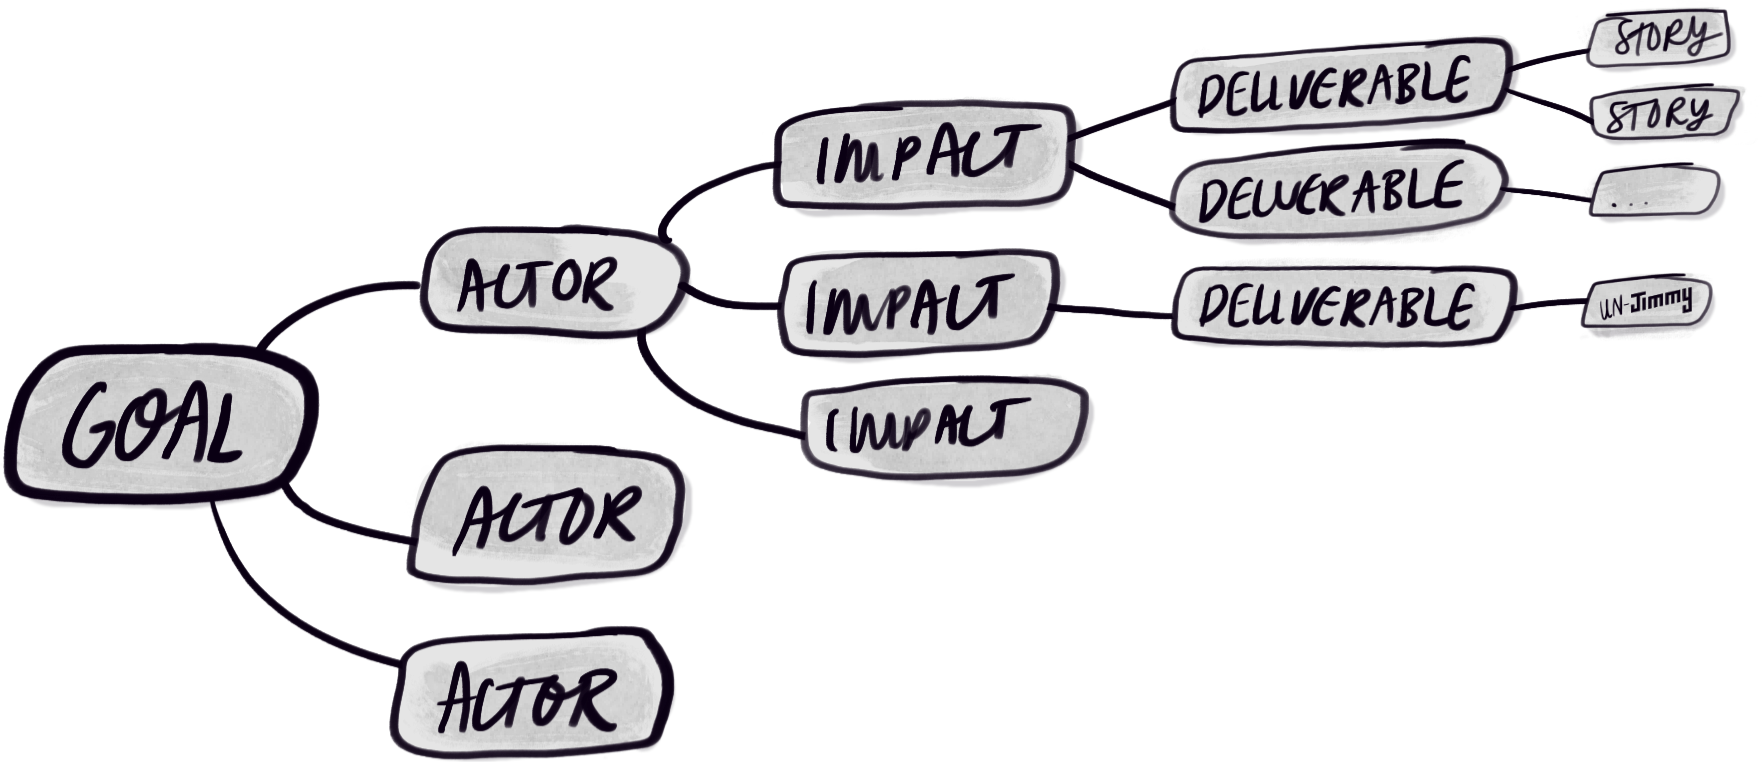 The Impact Map is a structured mindmap. Starting with Goals, it first maps Actors, then for each Actor, the Impacts, then for each Impact, the Deliverables, and for each Deliverable, the Stories that will create it.